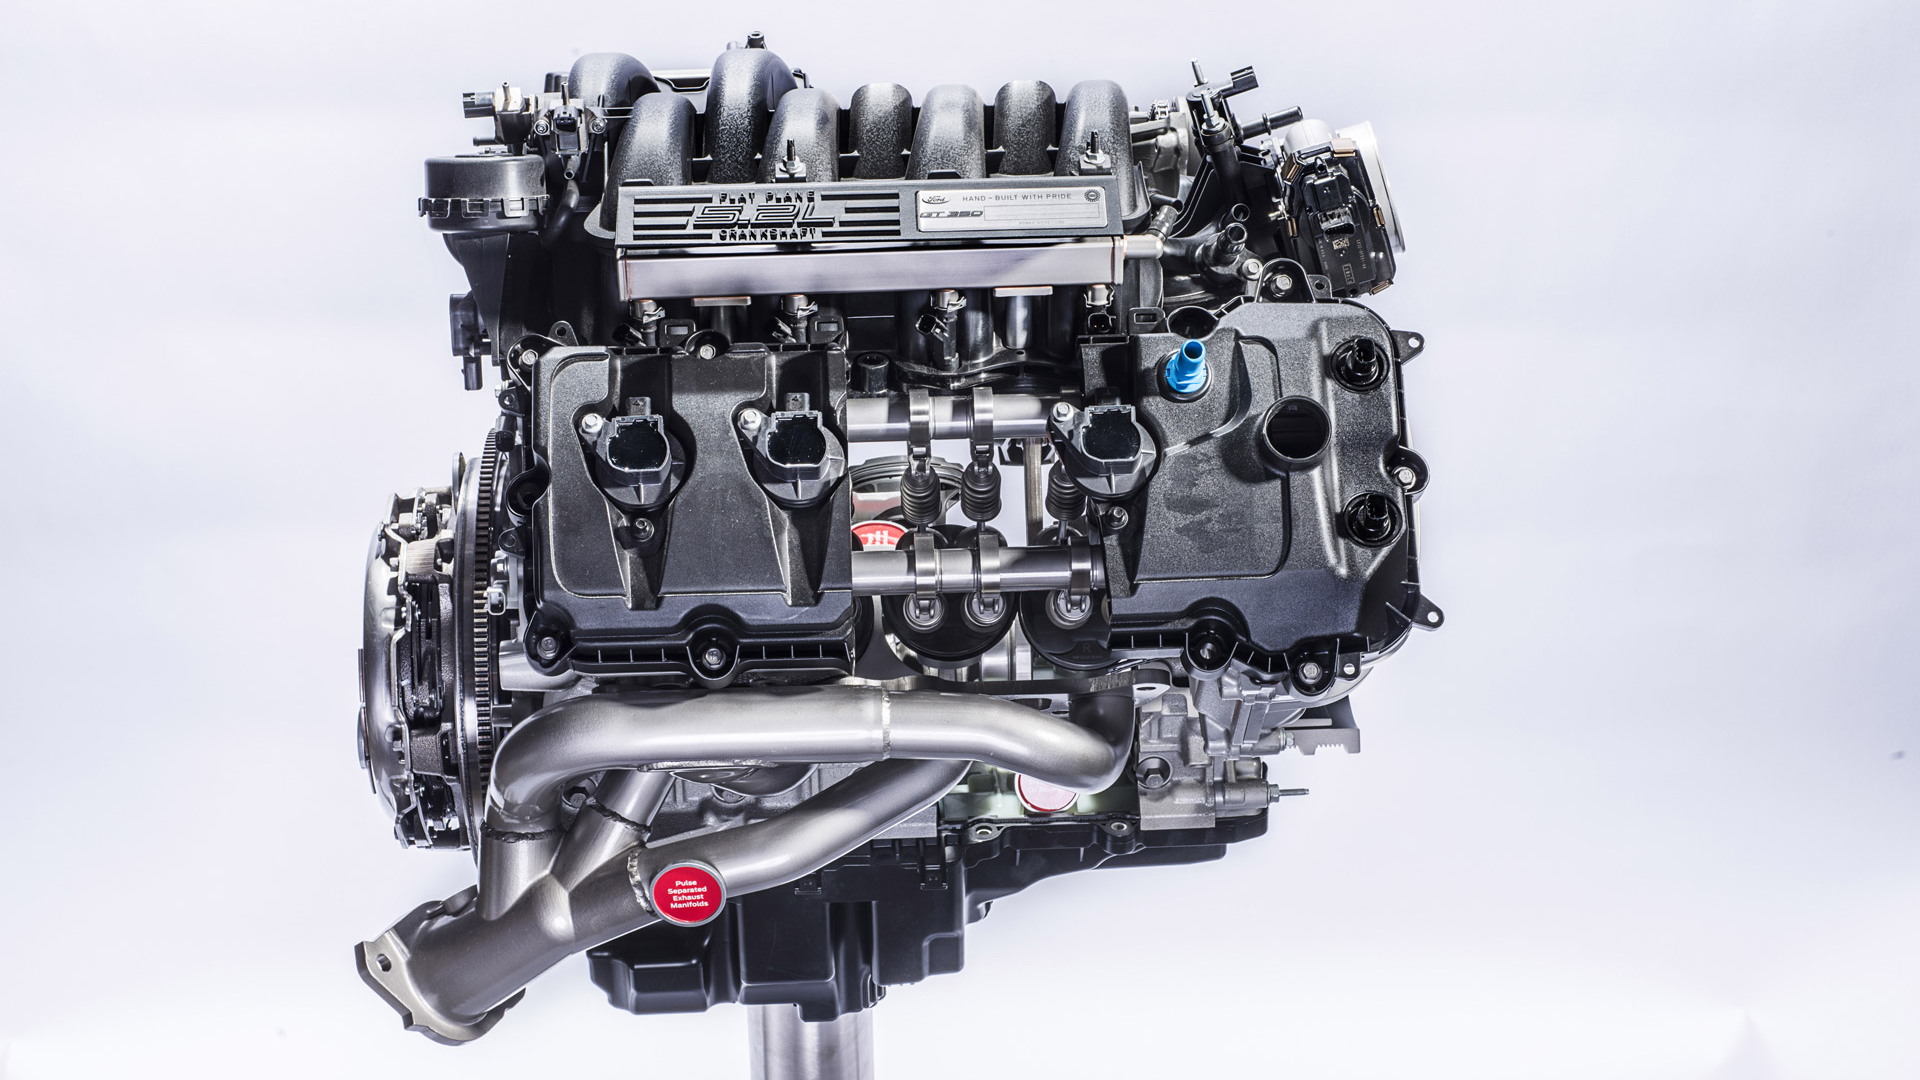 5.2-liter V-8 from the Ford Mustang Shelby GT350